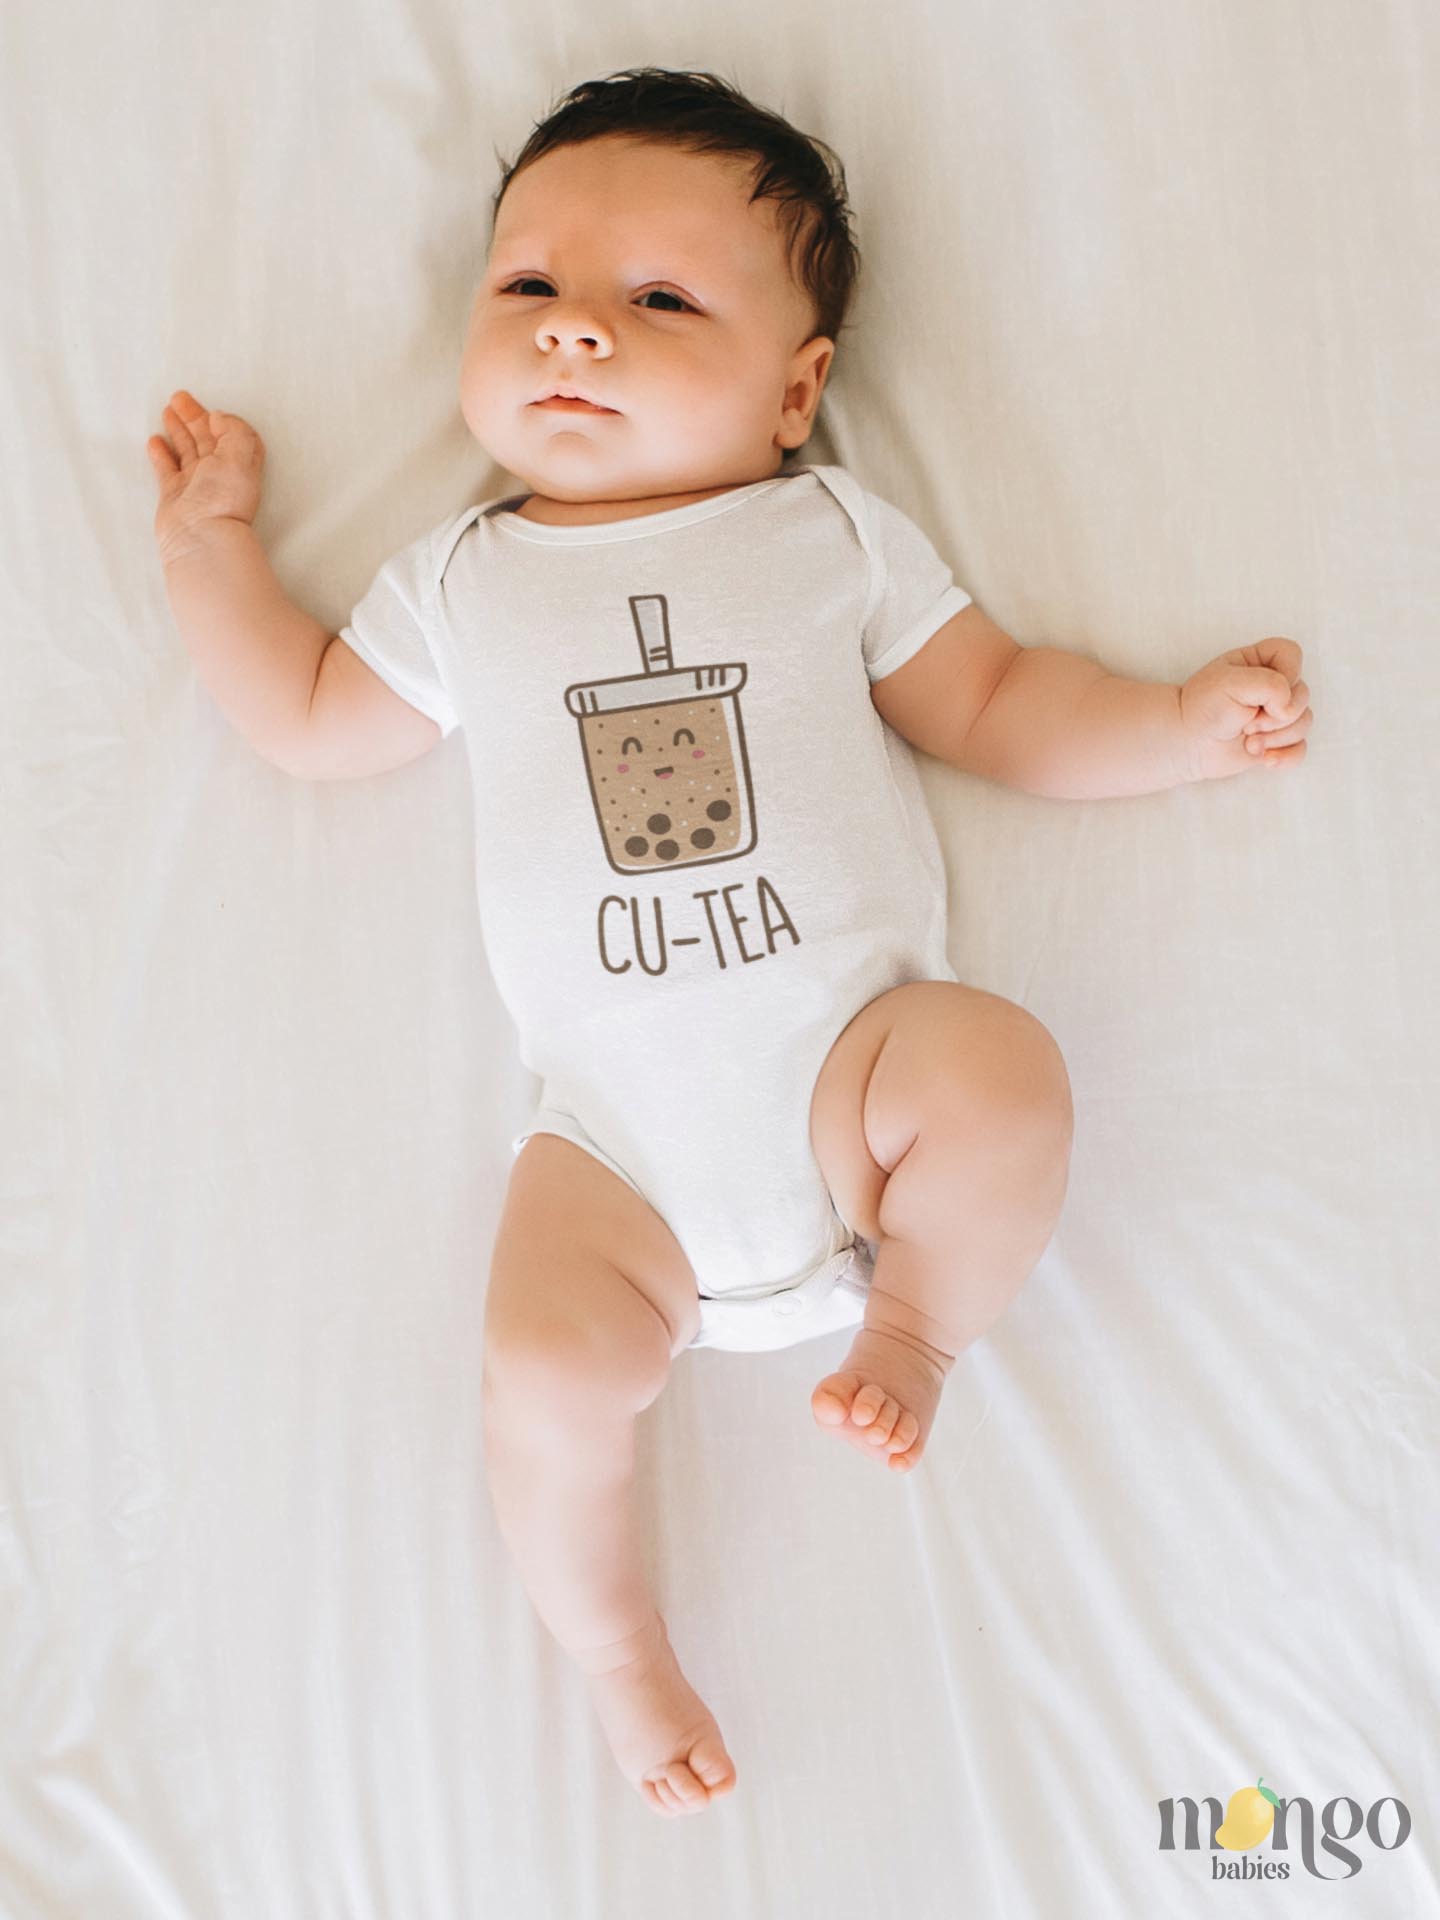 A kids' t-shirt with a charming graphic of a boba cup and the text 'Cu-tea.' The design captures the whimsical appeal of the popular tea drink and showcases the wearer's fondness for cuteness and trendy fashion.